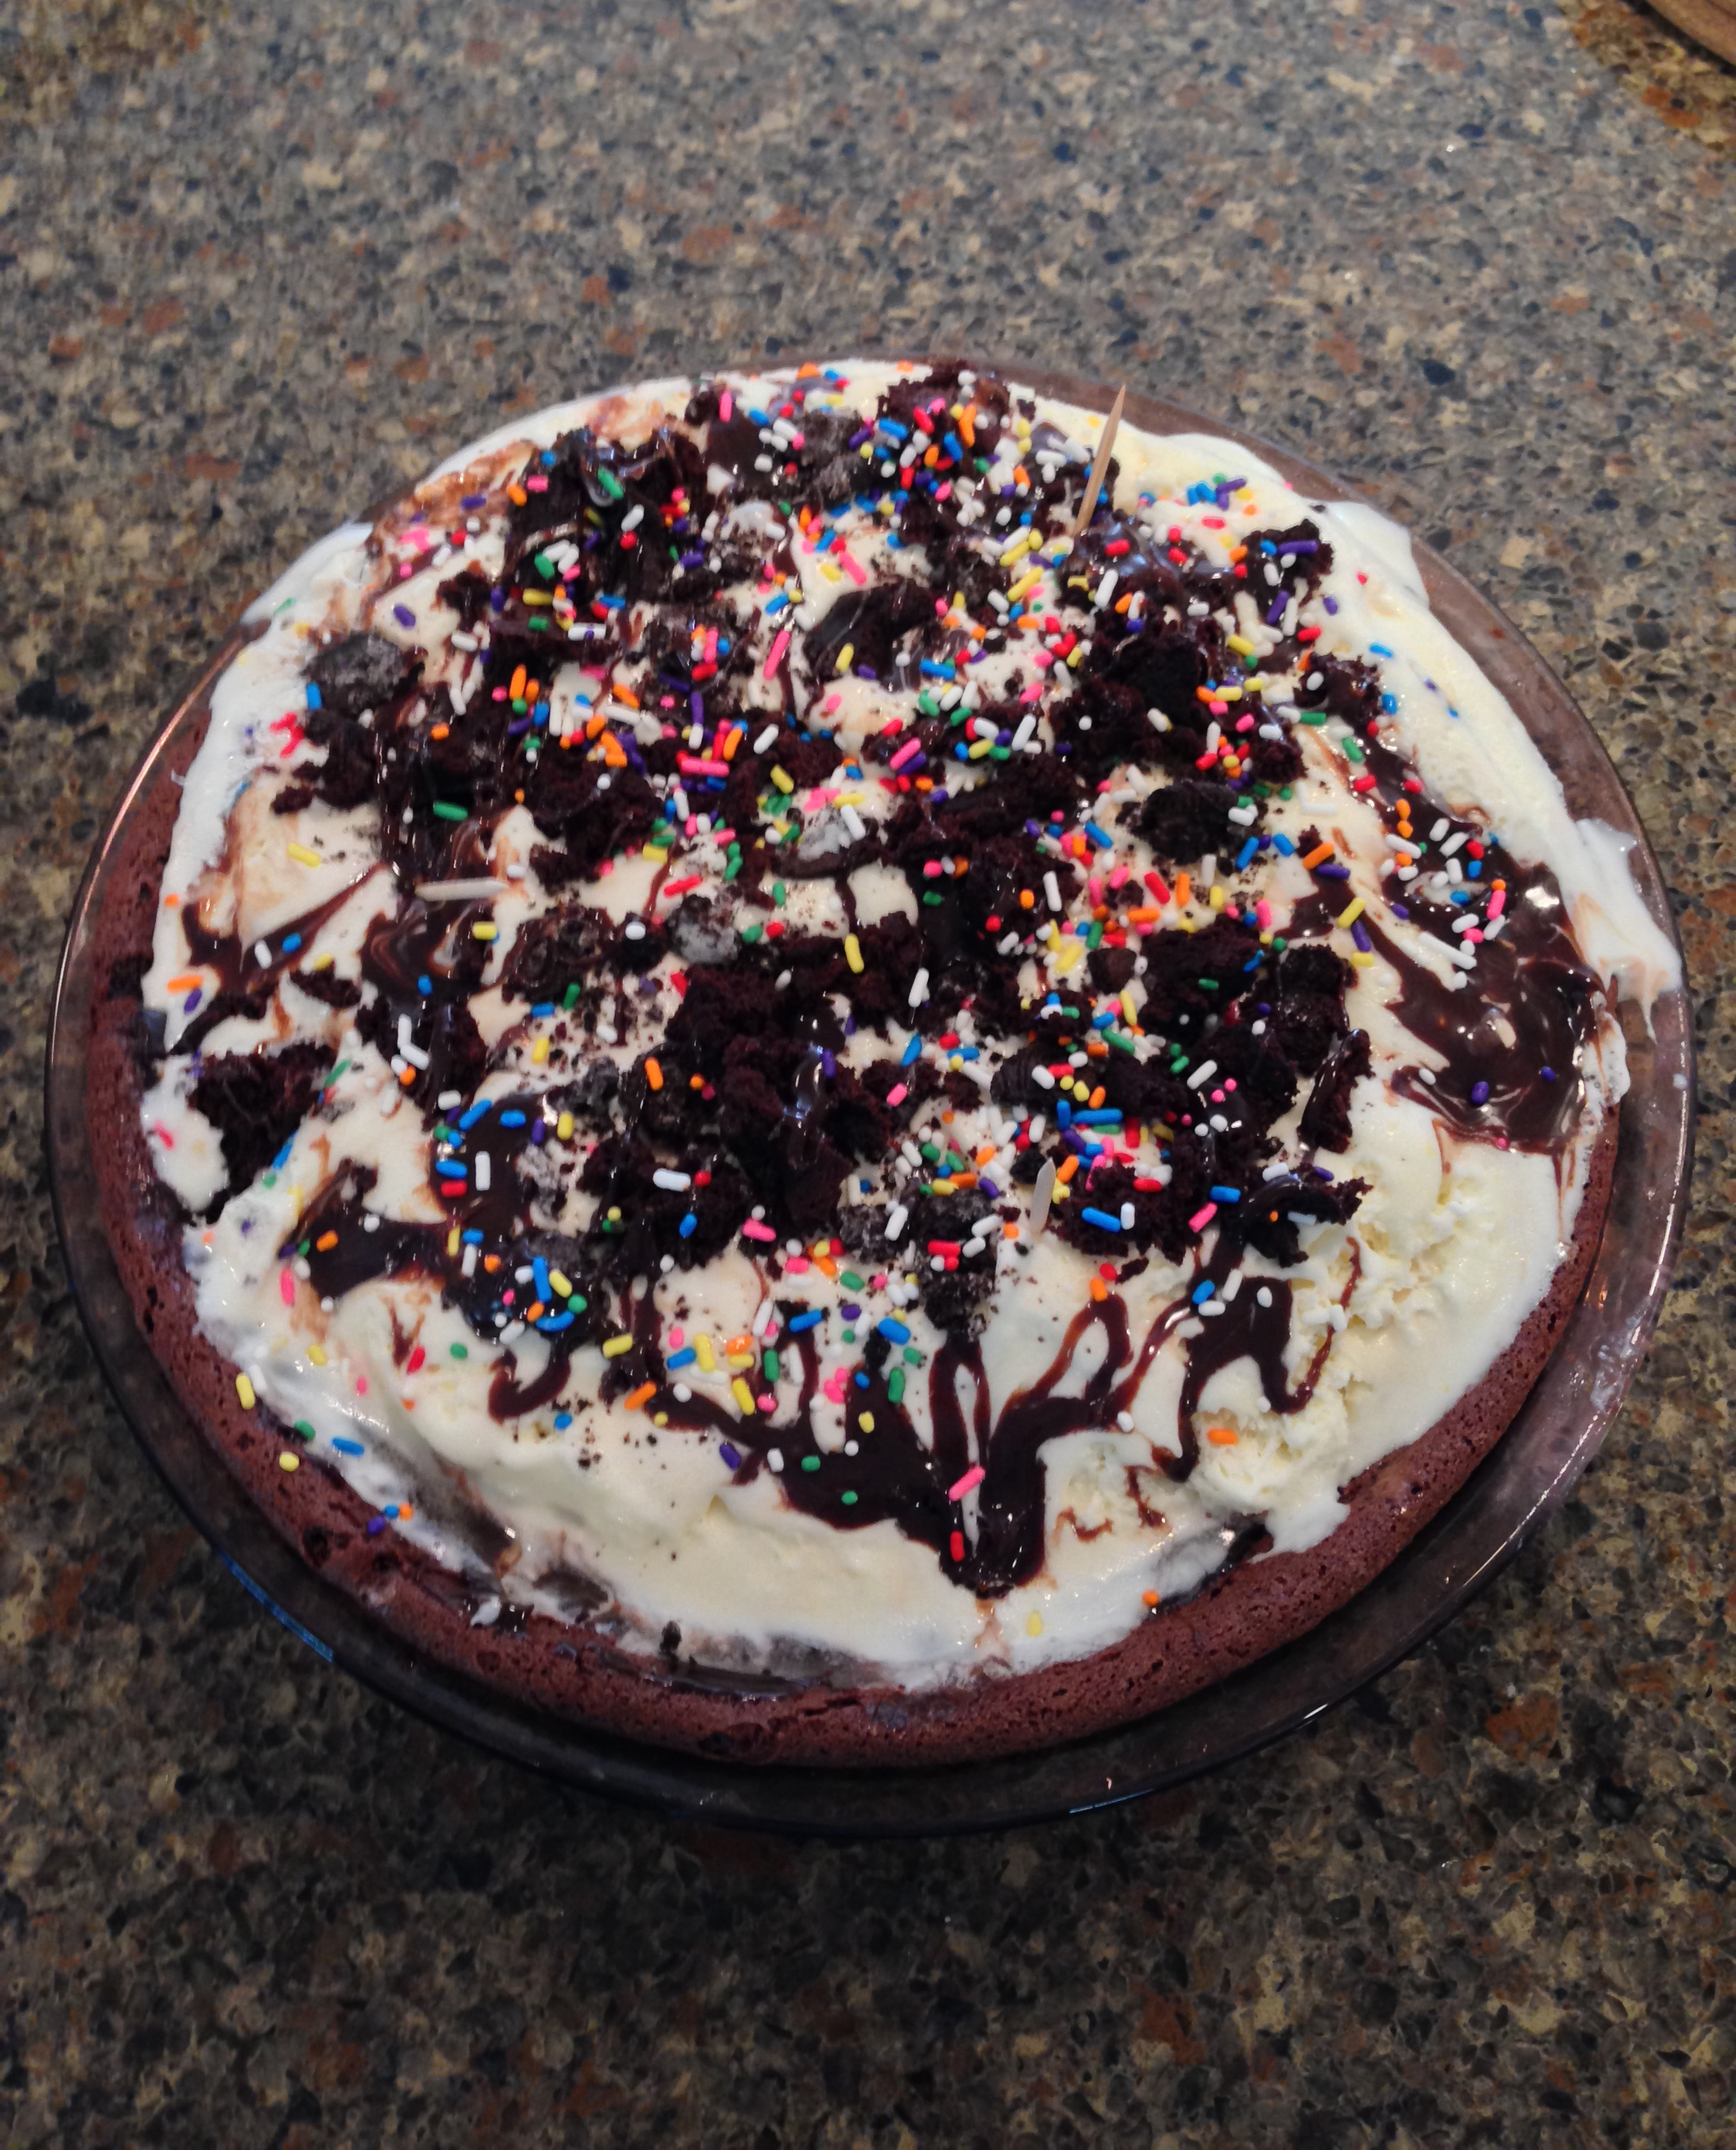 This is what my mom's famous ice cream pie looks like.